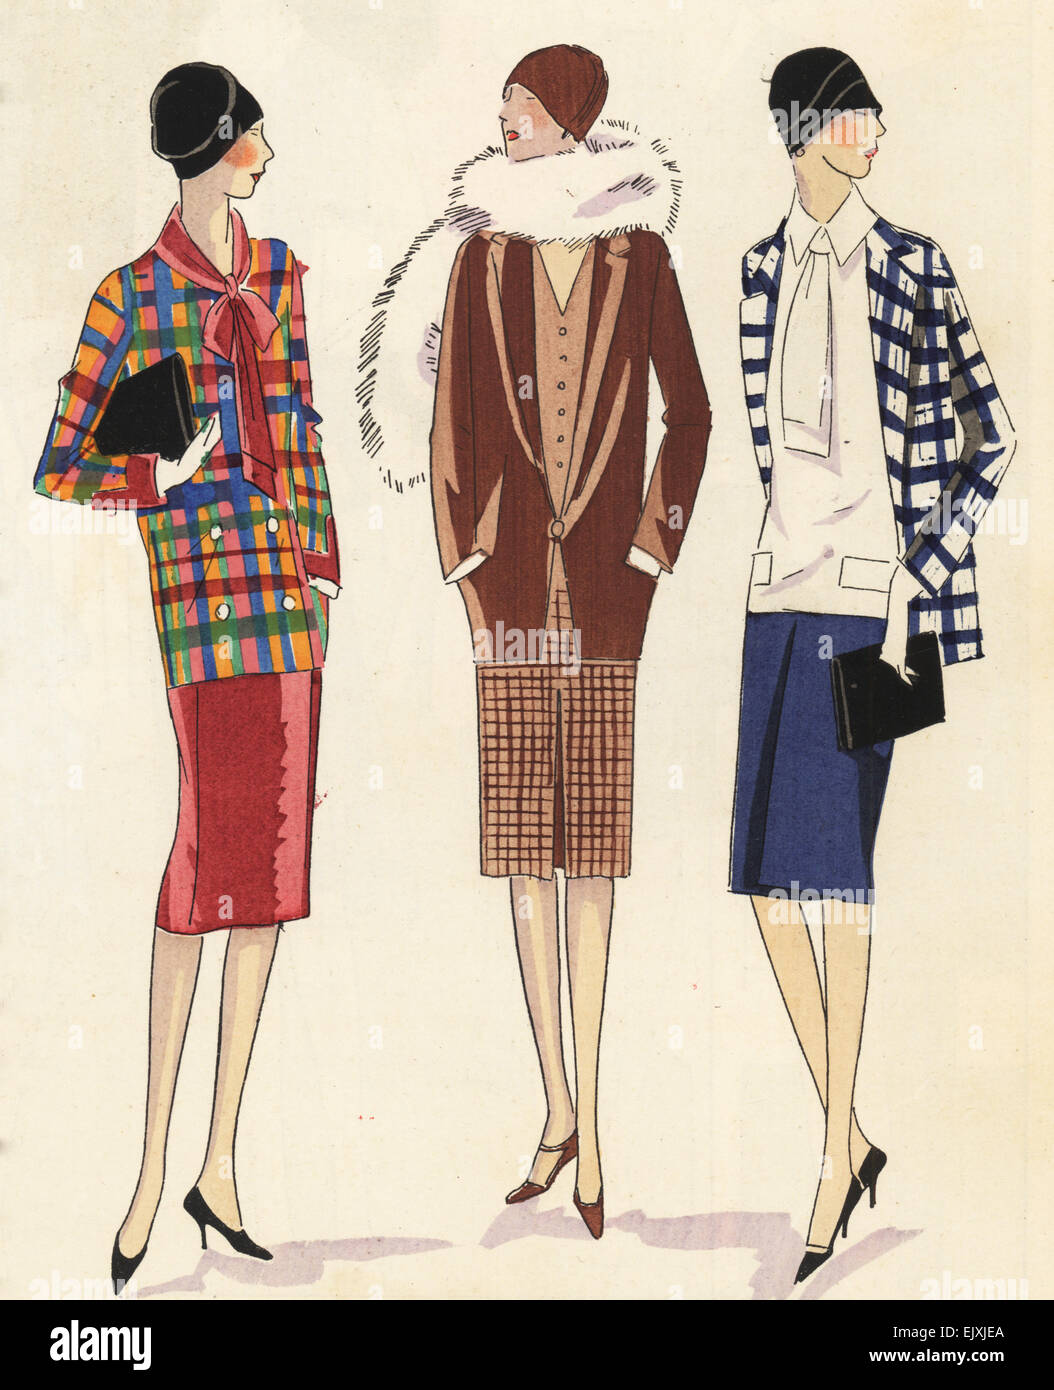 Woman in sports jacket of tartan taffeta and velvet skirt, woman in suit of chestnut and check linen, and woman in sports ensemble of blue and check linen. Stock Photo